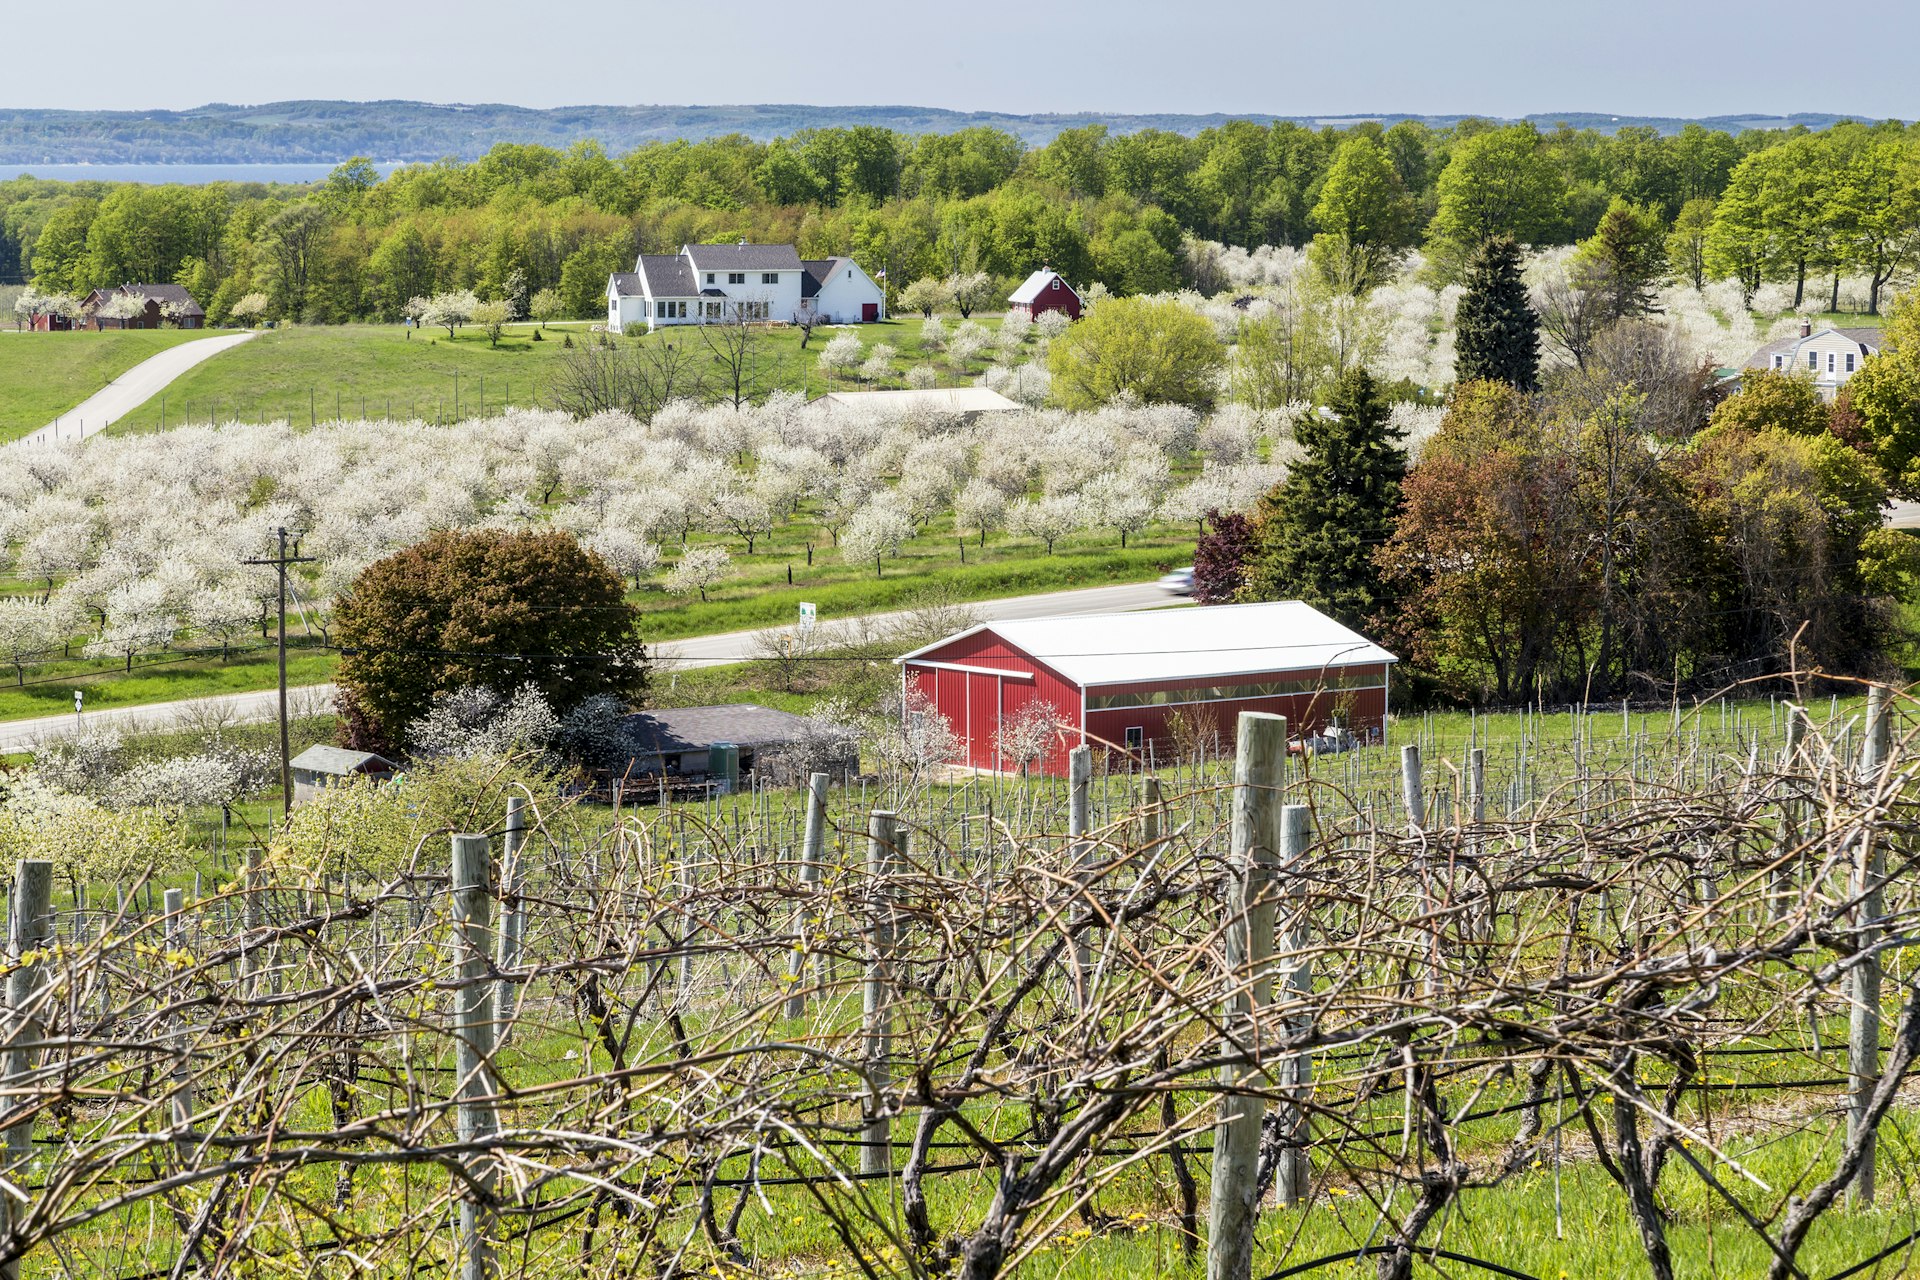 A cherry blossom orchard adjascent to a vineyard, with a red barn in between.